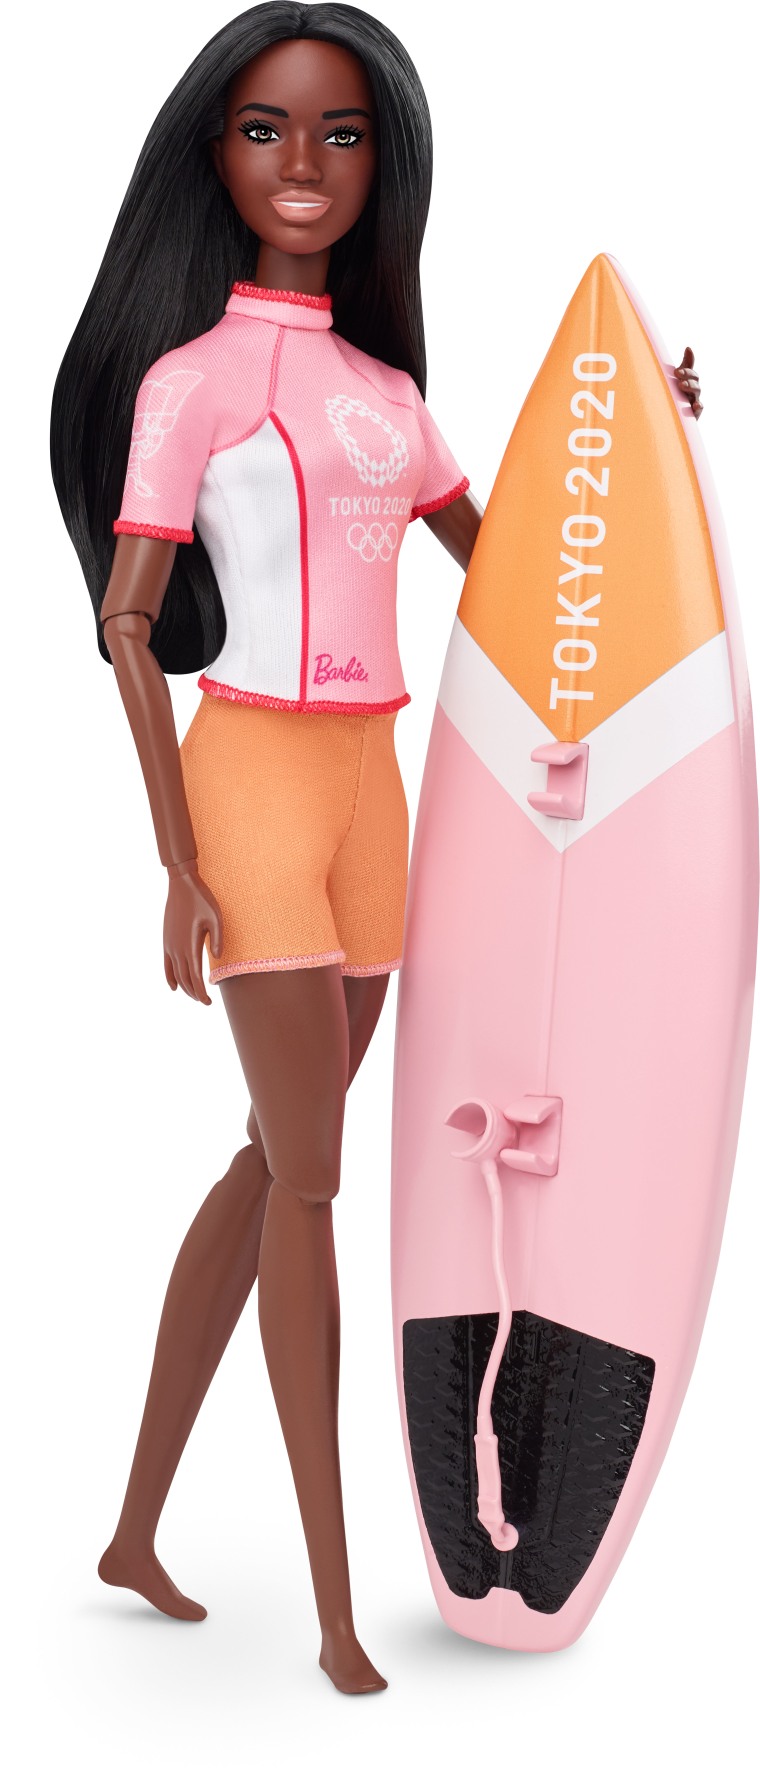 The Olympic surfer Barbie doll wears a wetsuit and comes with a surfboard.